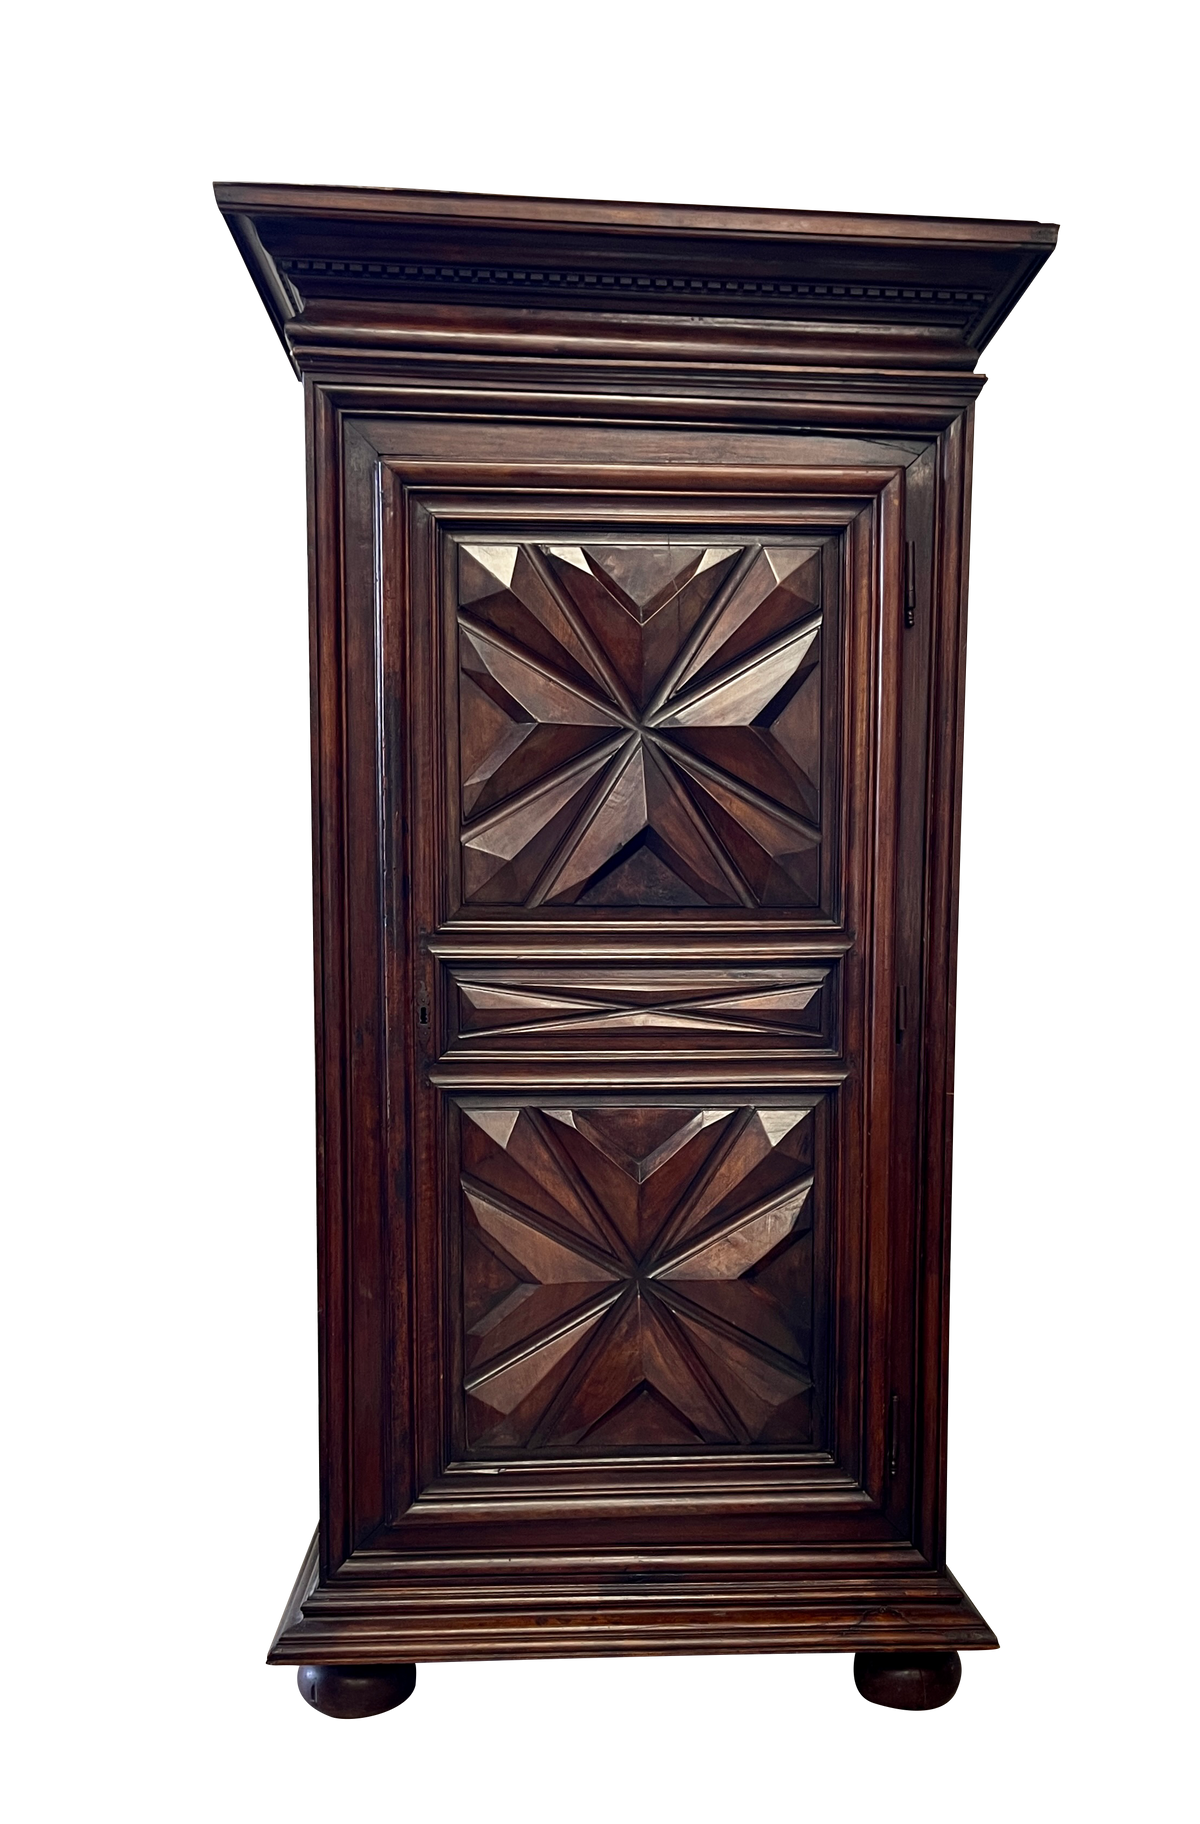 Louis XIV, 17th Century French small armoire - Homme-debout